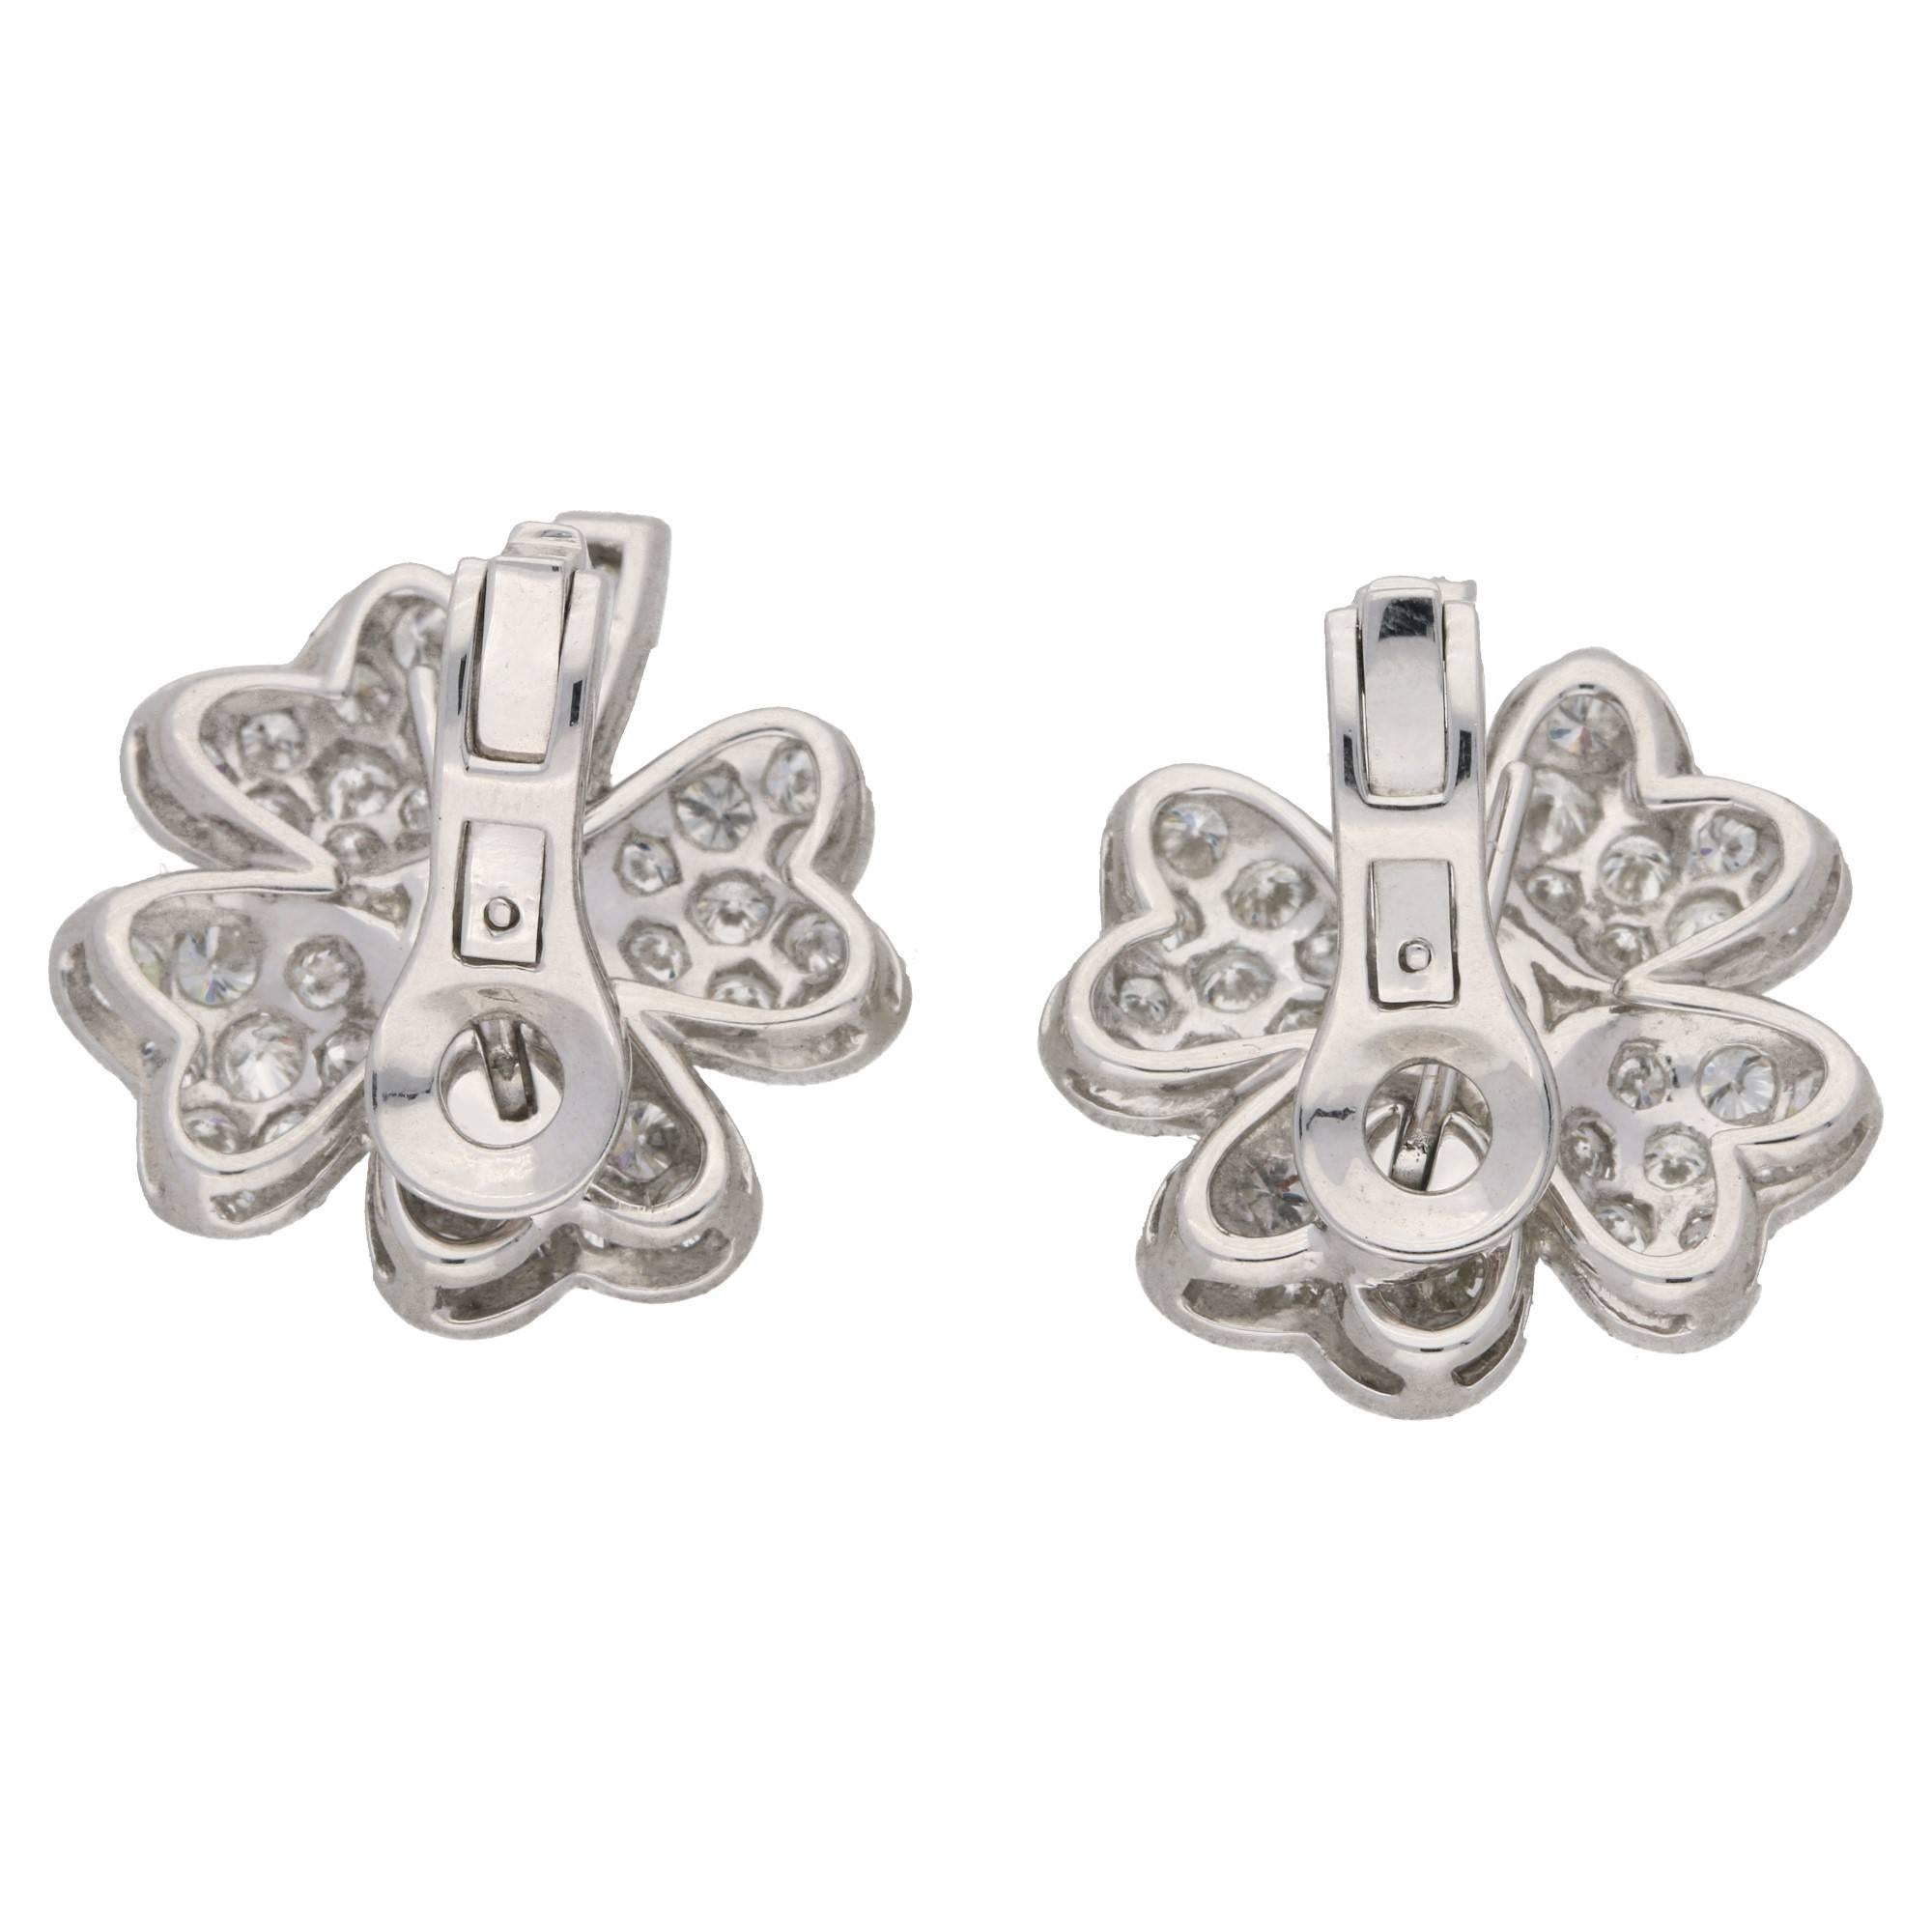 A lucky pair of vintage platinum and diamond four leaf clover earrings. Each earring has a transitional brilliant cut diamond centrally set in a mille grain collet, with four leaves of pave set round brilliant cut diamonds and a calibre cut channel